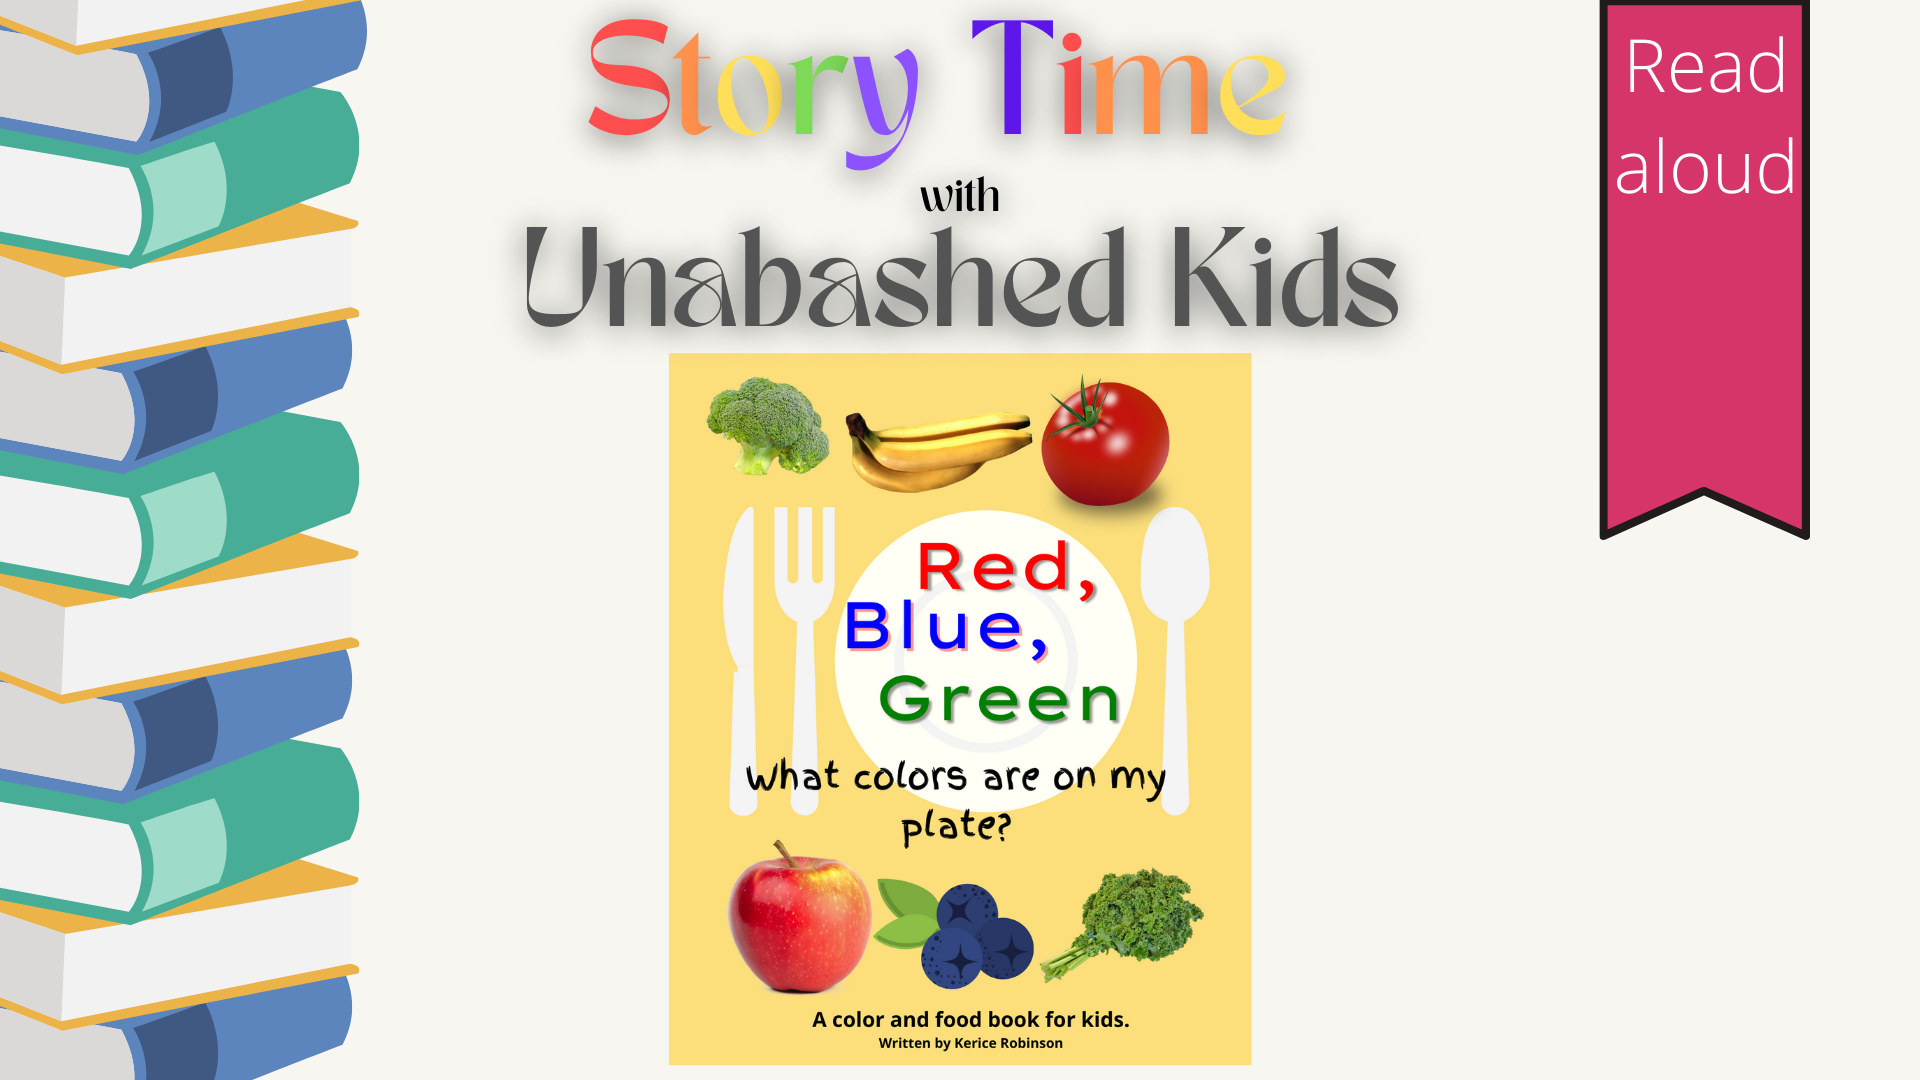 Red, Blue, green book read aloud